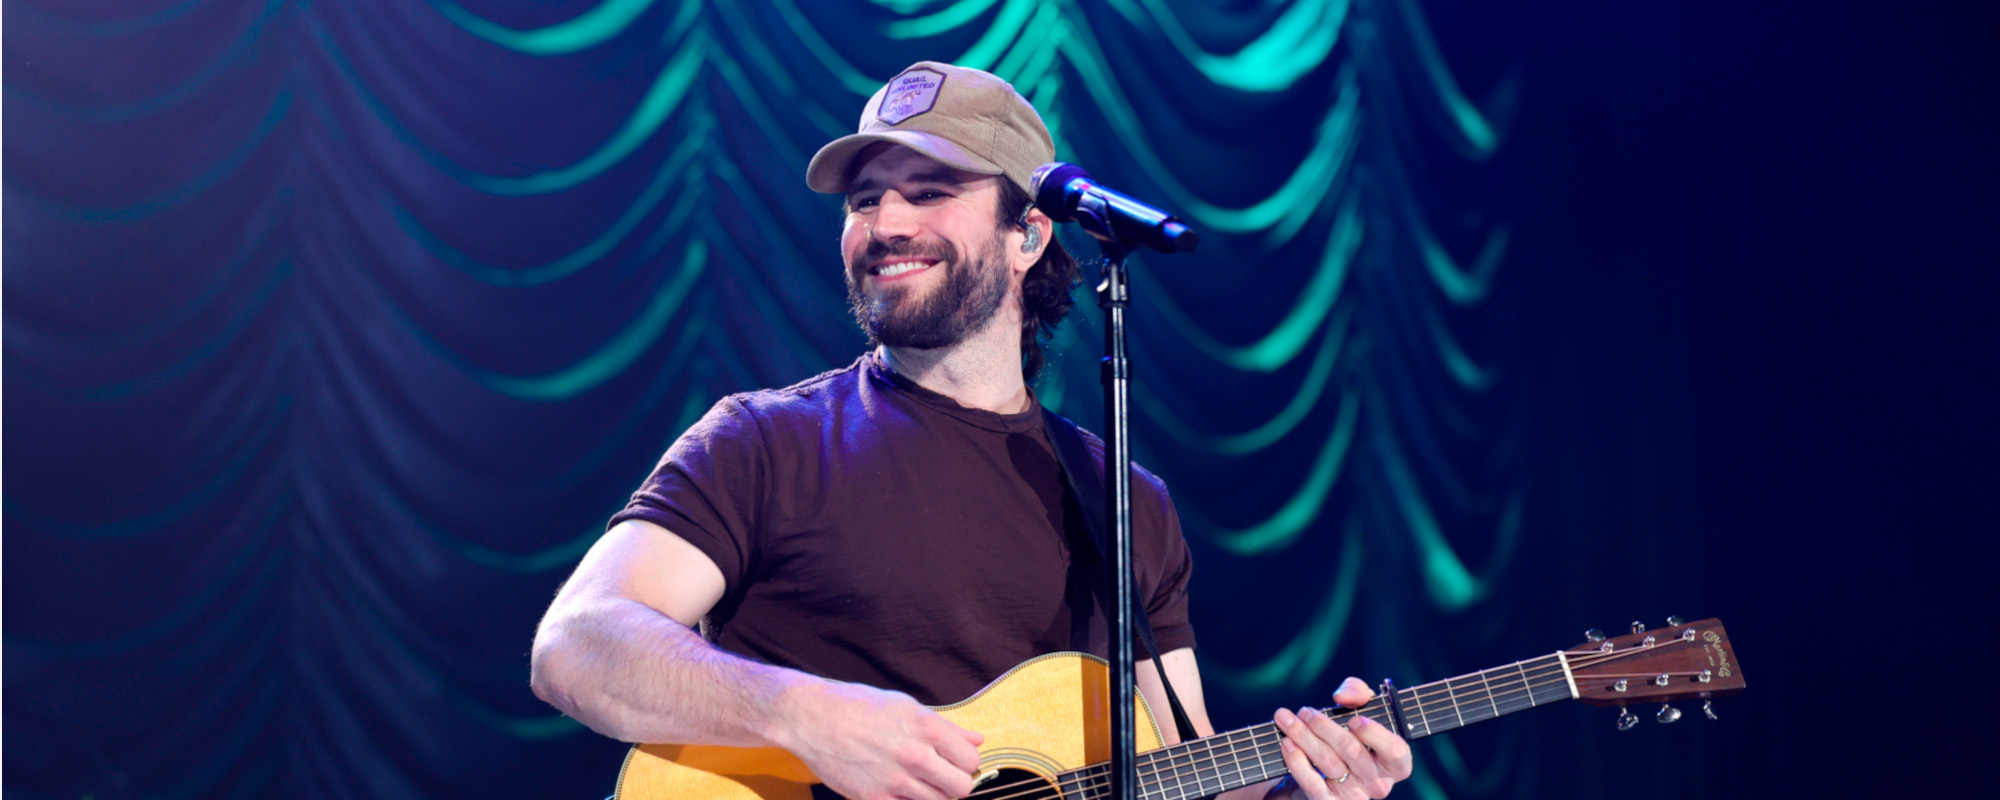 Sam Hunt Releases “Women In My Life” in Time for Mother’s Day